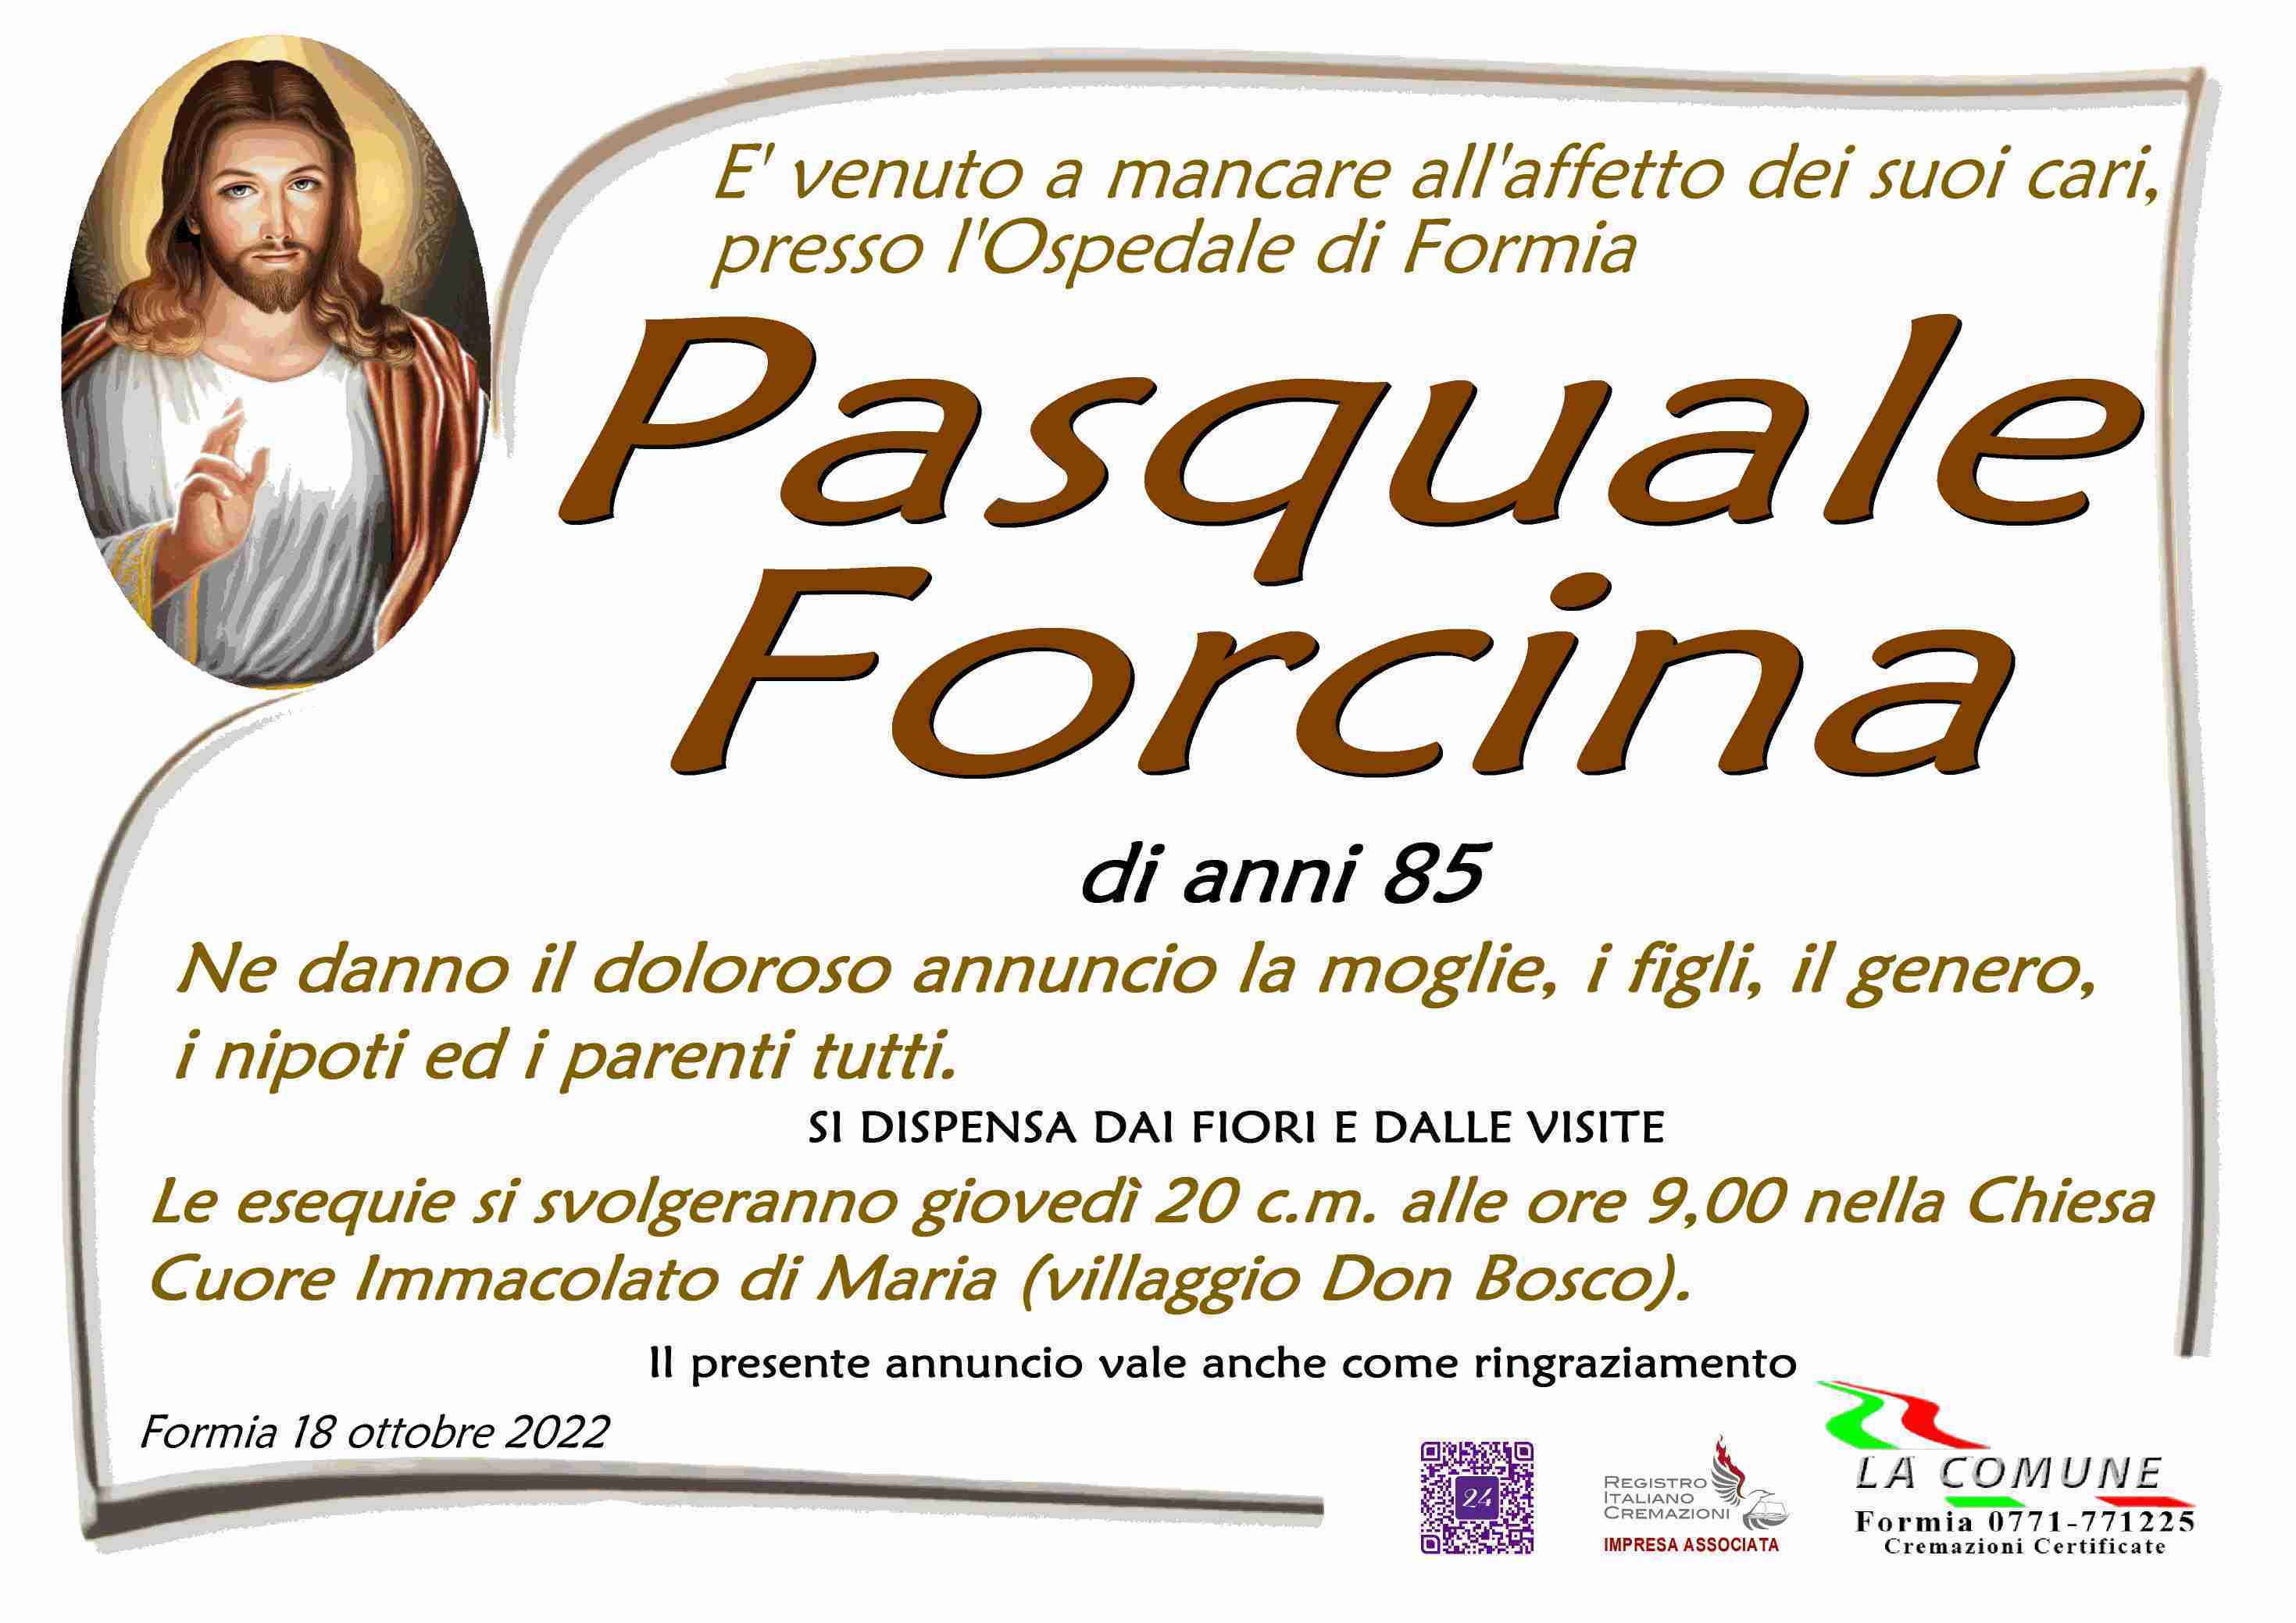 Pasquale Forcina